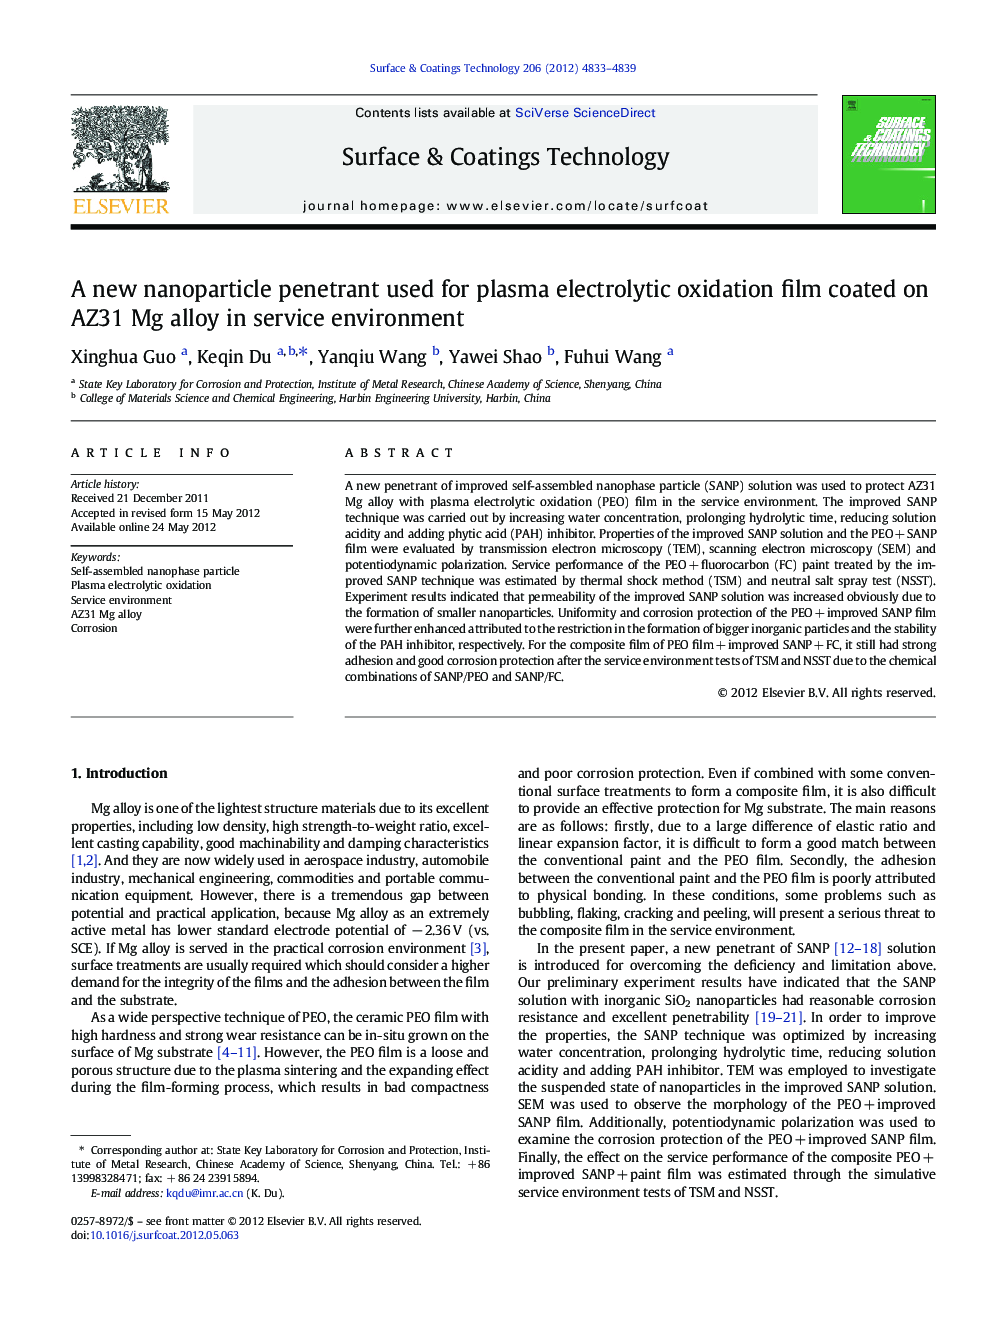 A new nanoparticle penetrant used for plasma electrolytic oxidation film coated on AZ31 Mg alloy in service environment